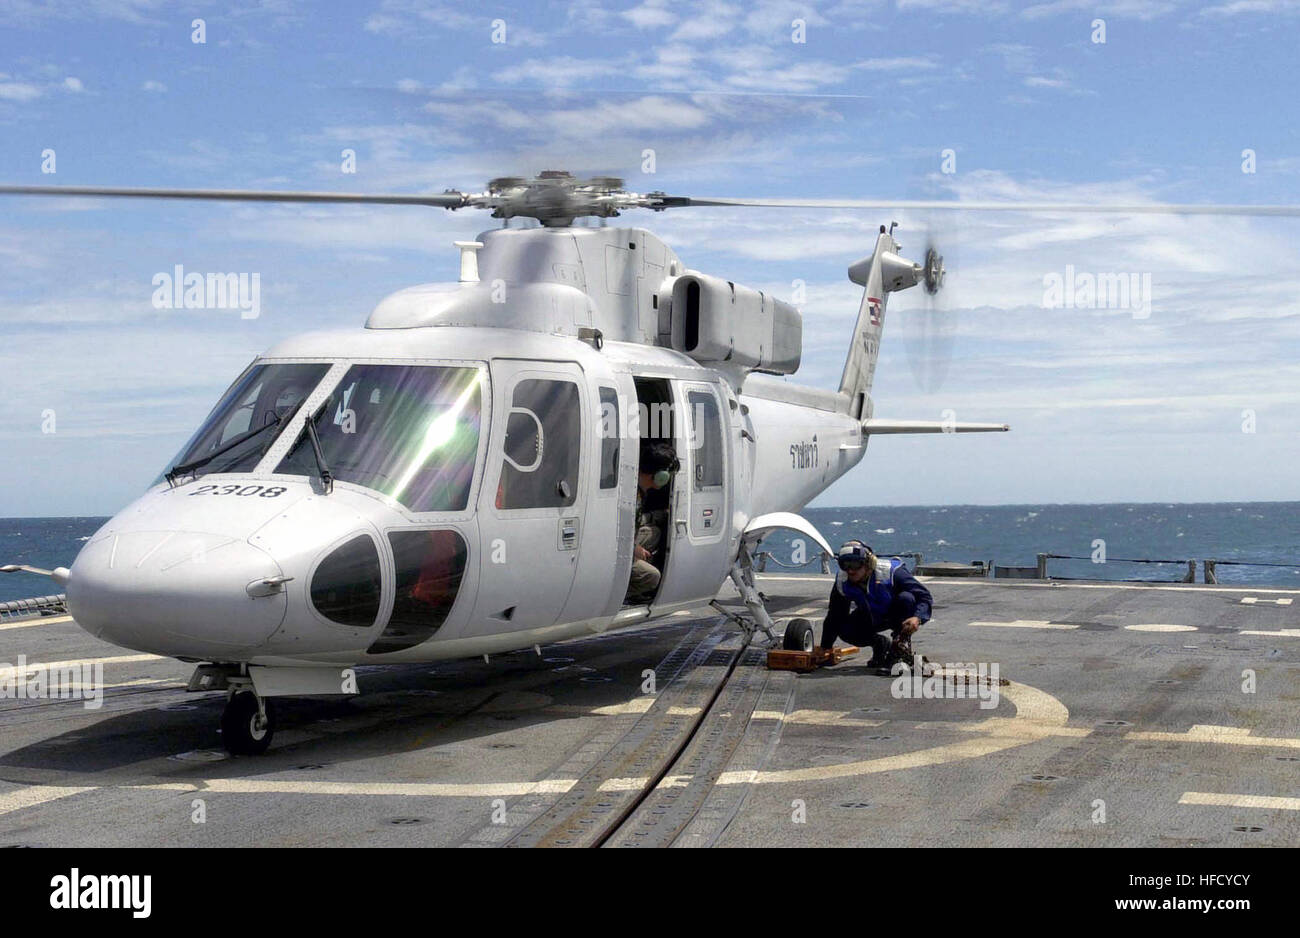 A Royal Thai Navy (RTN) Sikorsky S-76B helicopter, is secured to the flight deck onboard the USS CURTS (FFG 38) during Cooperation Afloat Readiness and Training (CARAT) Exercise 2001. Royal Thai Navy Sikorksy S-76B Stock Photo